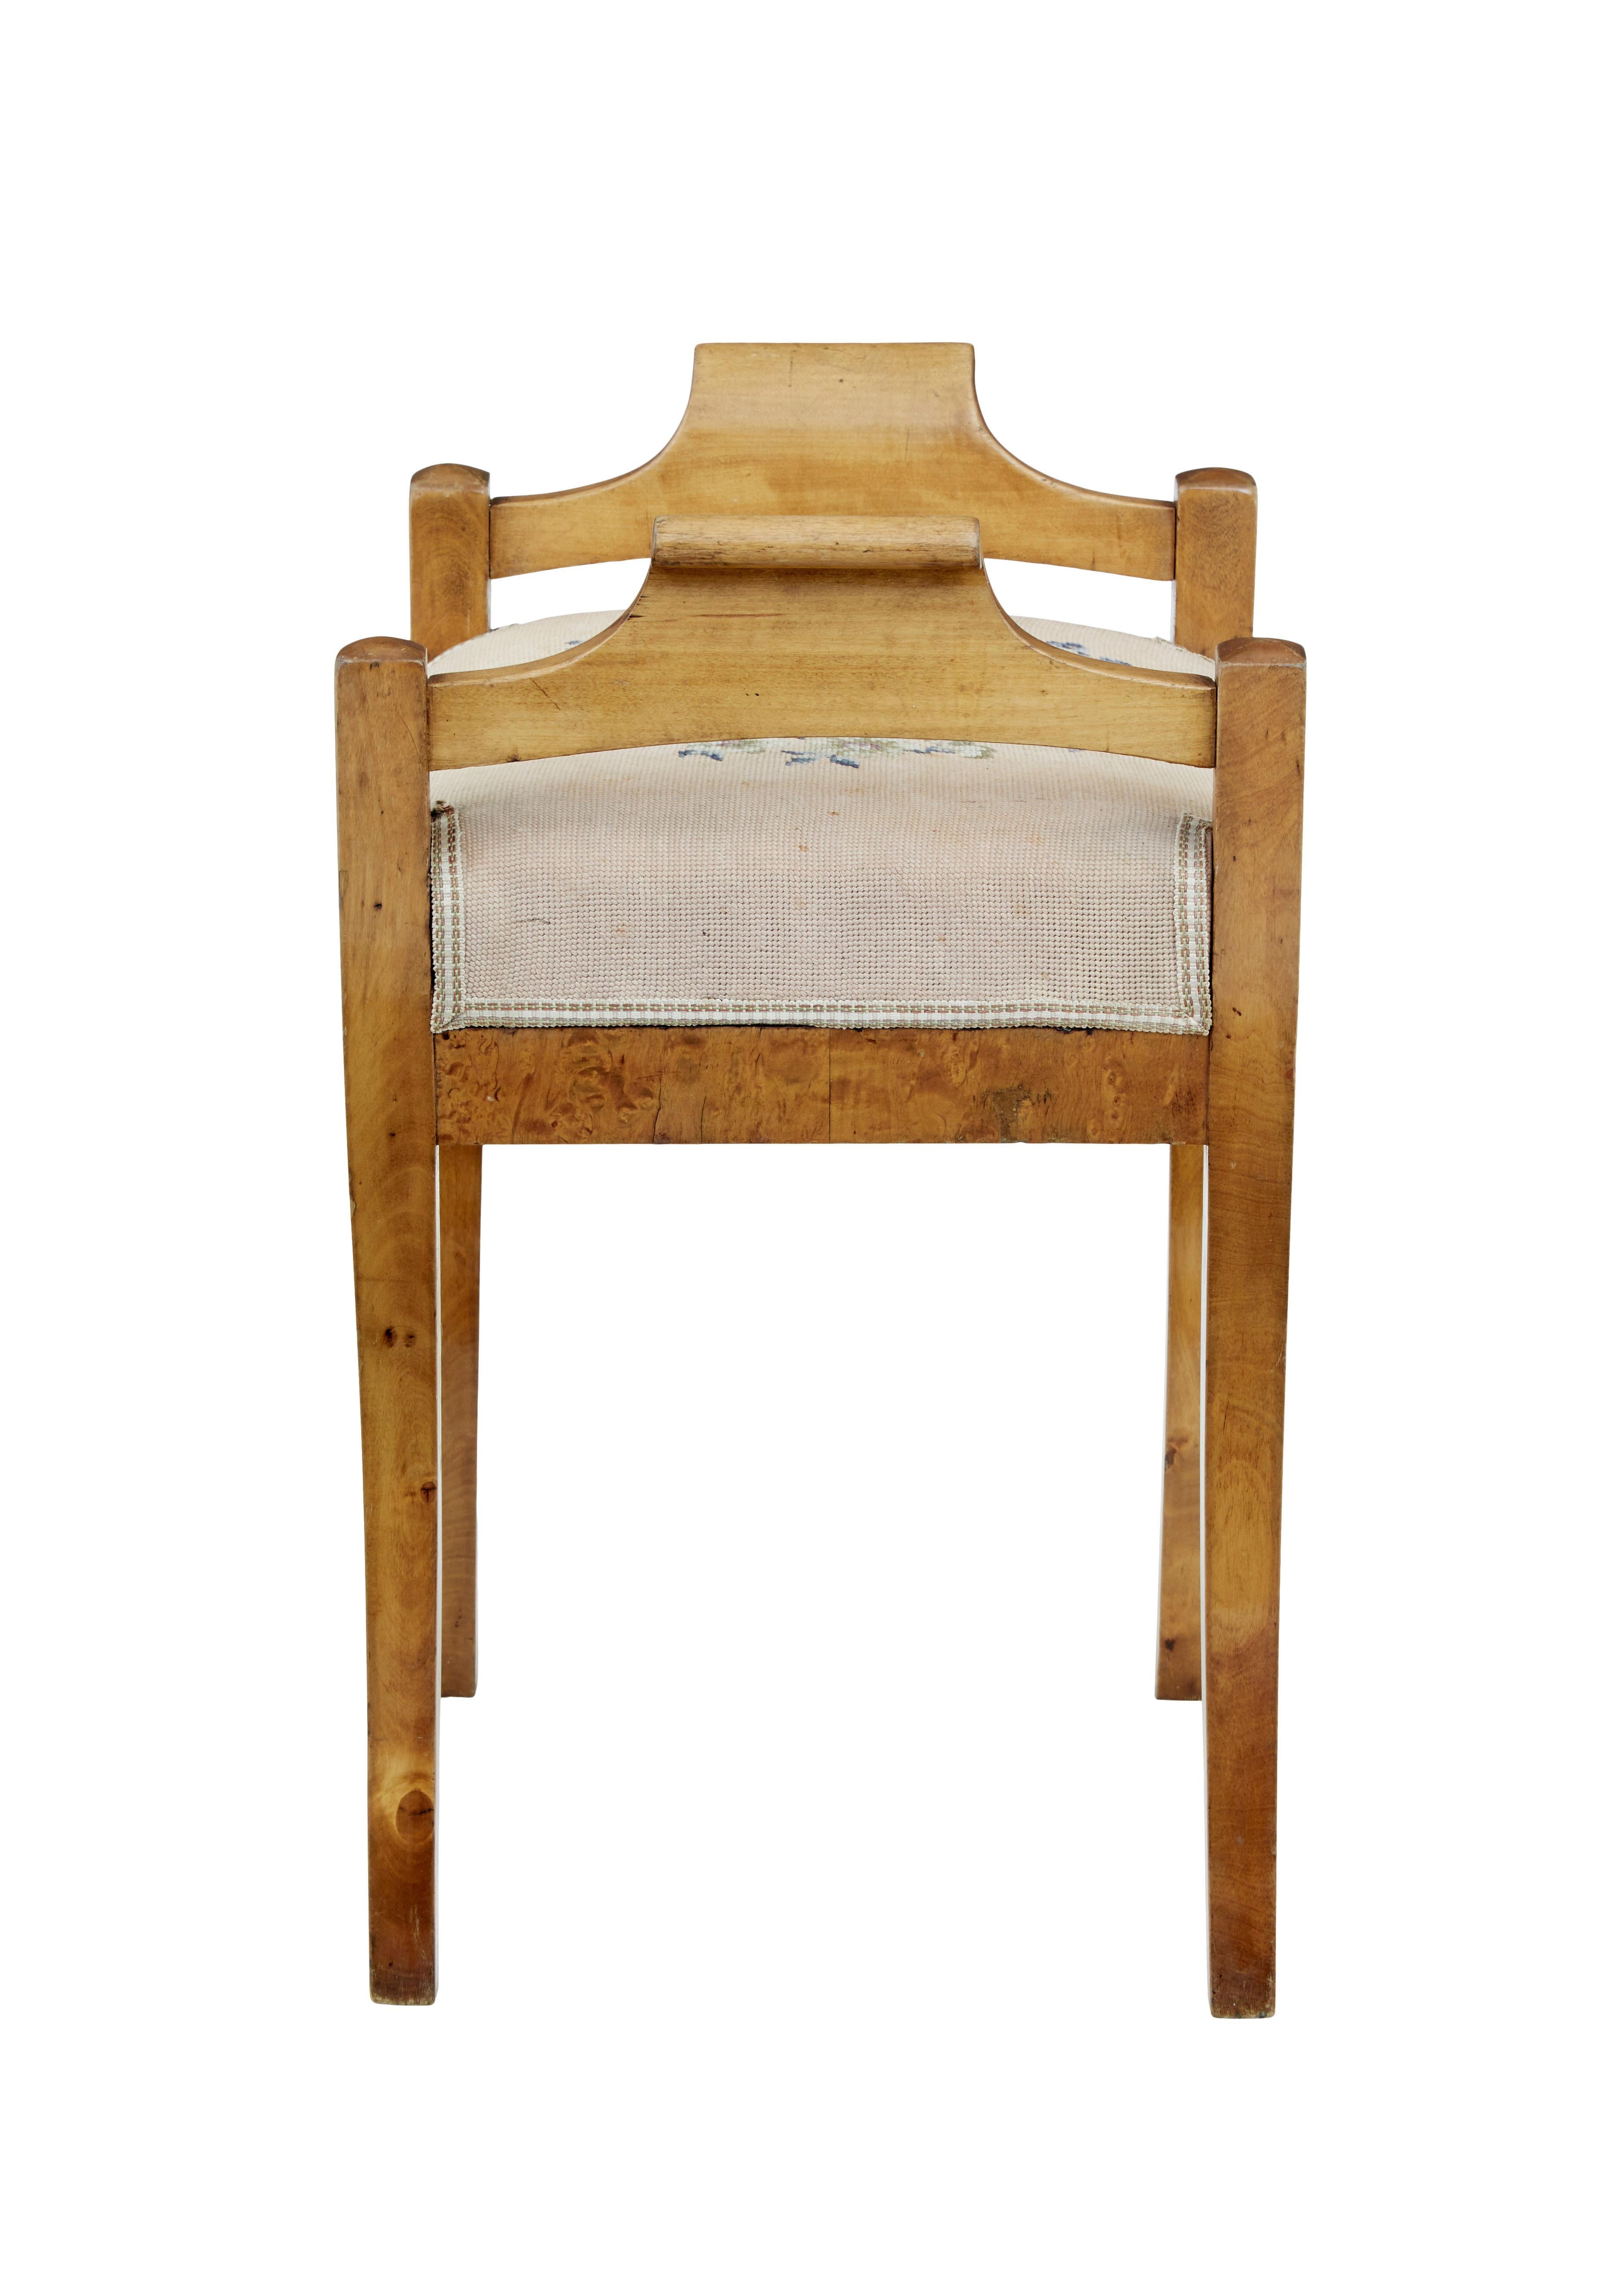 Mid-19th century birch Empire stool, circa 1850.

Scandinavian Empire period stool made in birch. Shaped support handles which flow through to the 4 splayed legs. Original floral tapestry seat covering.

Minor losses to woodwork, expected fading